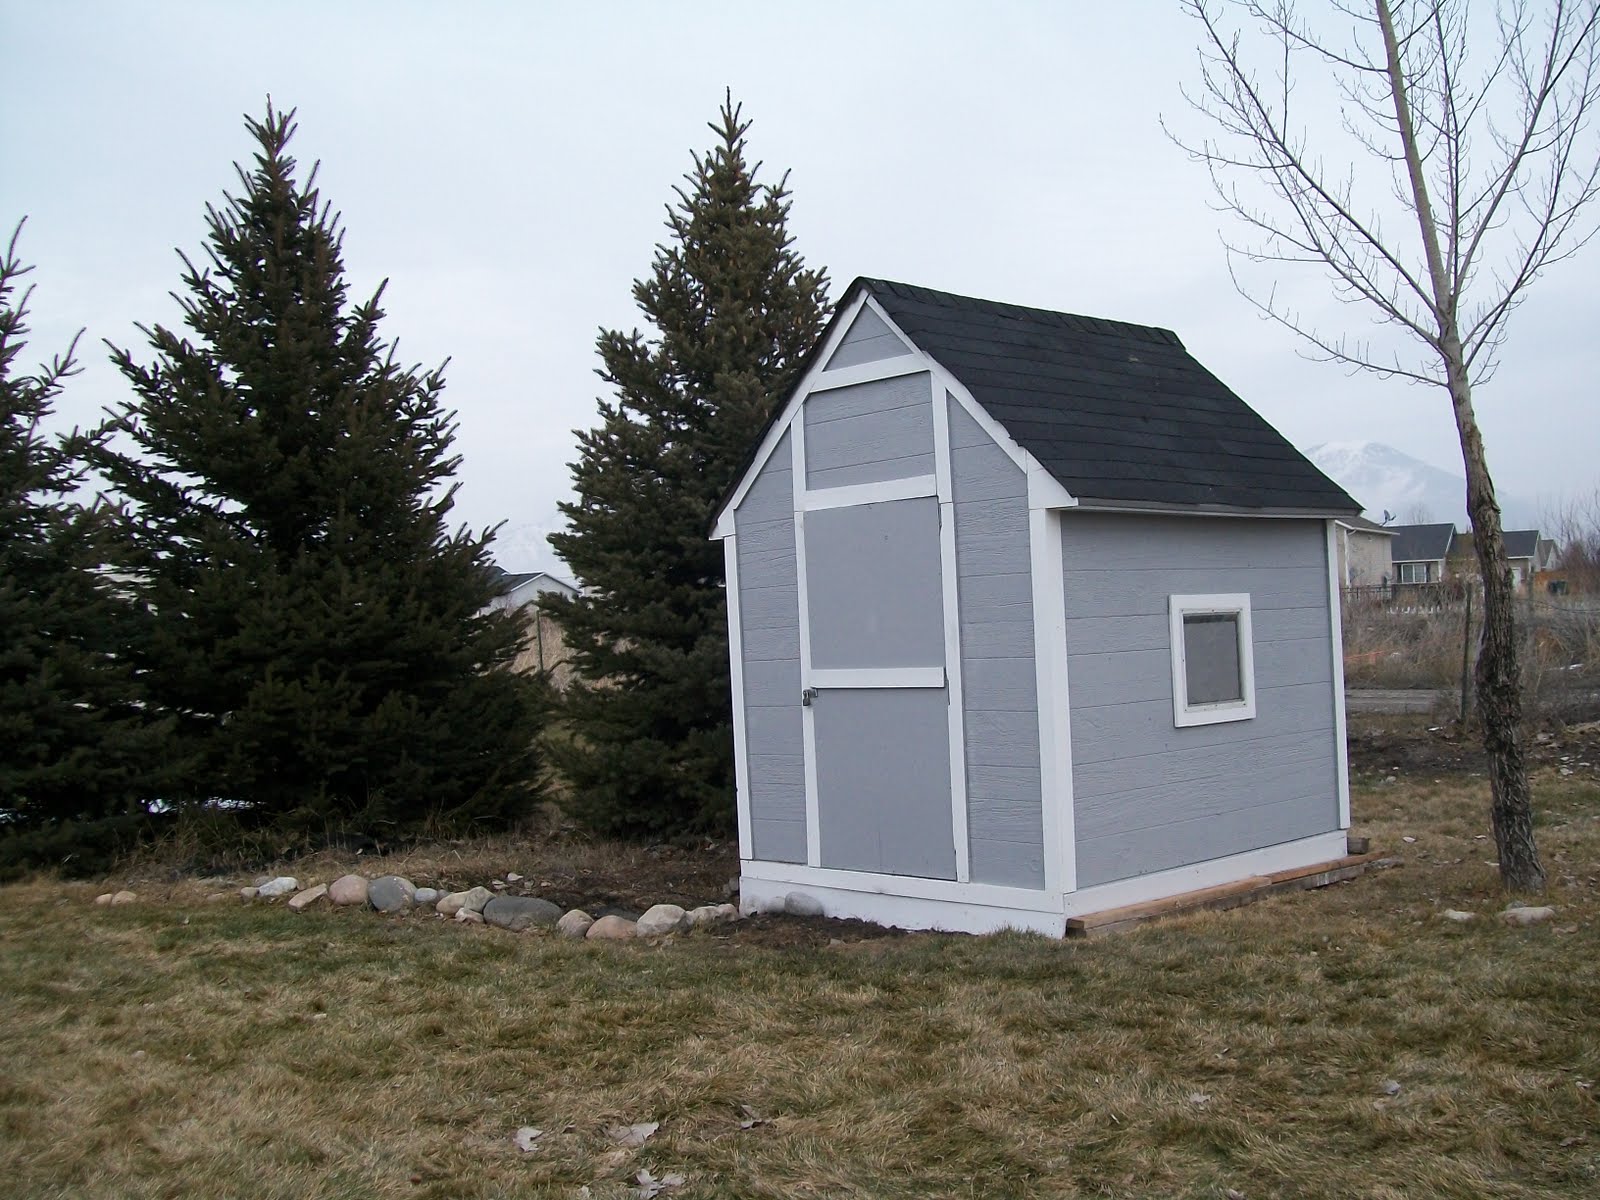 For Sale: 6x8' Storage Shed/Play House and Back Yard